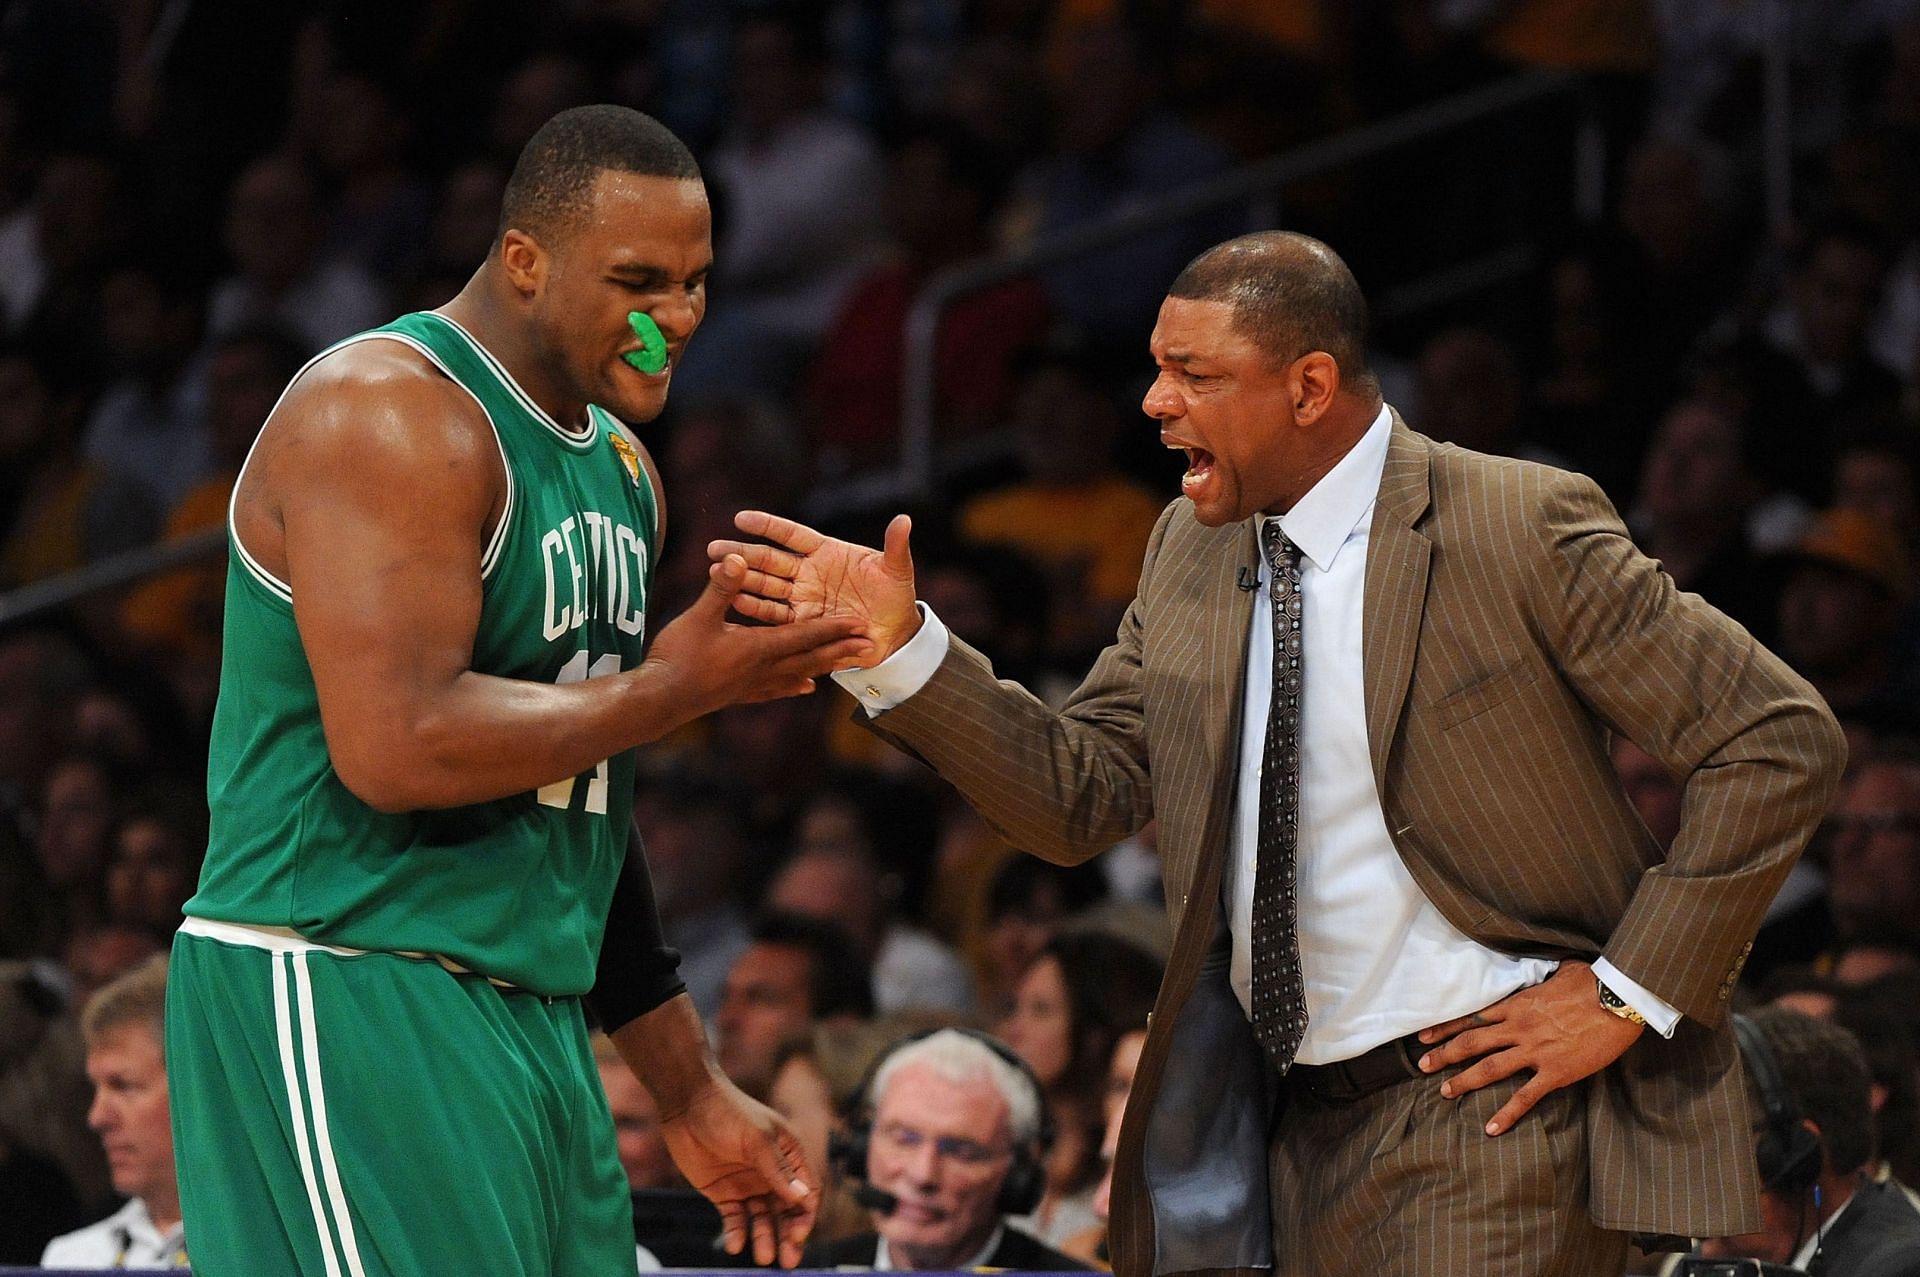 Former NBA champion says Doc Rivers lowballed him in contract talks for smoking weed